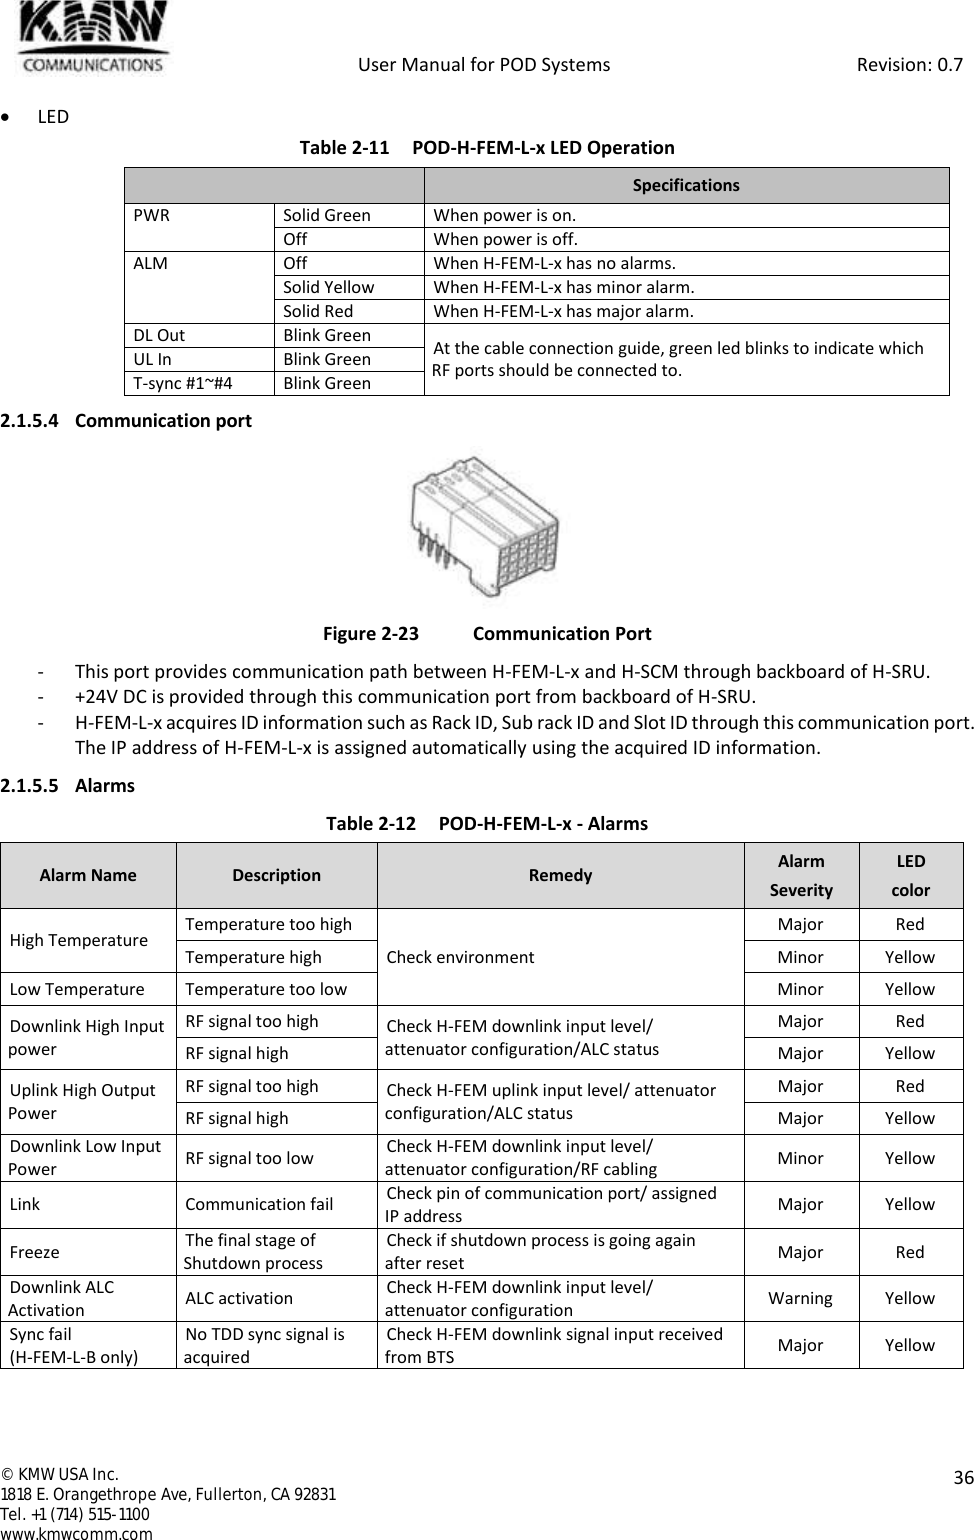            User Manual for POD Systems                                                     Revision: 0.7  ©  KMW USA Inc. 1818 E. Orangethrope Ave, Fullerton, CA 92831 Tel. +1 (714) 515-1100 www.kmwcomm.com  36   LED Table 2-11 POD-H-FEM-L-x LED Operation  Specifications PWR Solid Green When power is on. Off When power is off. ALM Off When H-FEM-L-x has no alarms. Solid Yellow When H-FEM-L-x has minor alarm. Solid Red When H-FEM-L-x has major alarm. DL Out Blink Green At the cable connection guide, green led blinks to indicate which RF ports should be connected to. UL In Blink Green T-sync #1~#4 Blink Green 2.1.5.4 Communication port  Figure 2-23  Communication Port - This port provides communication path between H-FEM-L-x and H-SCM through backboard of H-SRU. - +24V DC is provided through this communication port from backboard of H-SRU. - H-FEM-L-x acquires ID information such as Rack ID, Sub rack ID and Slot ID through this communication port. The IP address of H-FEM-L-x is assigned automatically using the acquired ID information. 2.1.5.5 Alarms Table 2-12 POD-H-FEM-L-x - Alarms Alarm Name Description Remedy Alarm Severity LED color High Temperature Temperature too high Check environment Major Red Temperature high Minor Yellow Low Temperature Temperature too low Minor Yellow Downlink High Input power RF signal too high Check H-FEM downlink input level/ attenuator configuration/ALC status Major Red RF signal high Major Yellow Uplink High Output Power RF signal too high Check H-FEM uplink input level/ attenuator configuration/ALC status Major Red RF signal high Major Yellow Downlink Low Input Power RF signal too low Check H-FEM downlink input level/ attenuator configuration/RF cabling Minor Yellow Link Communication fail Check pin of communication port/ assigned IP address Major Yellow Freeze The final stage of Shutdown process Check if shutdown process is going again after reset Major Red Downlink ALC Activation ALC activation Check H-FEM downlink input level/ attenuator configuration Warning Yellow Sync fail (H-FEM-L-B only) No TDD sync signal is acquired Check H-FEM downlink signal input received from BTS Major Yellow  